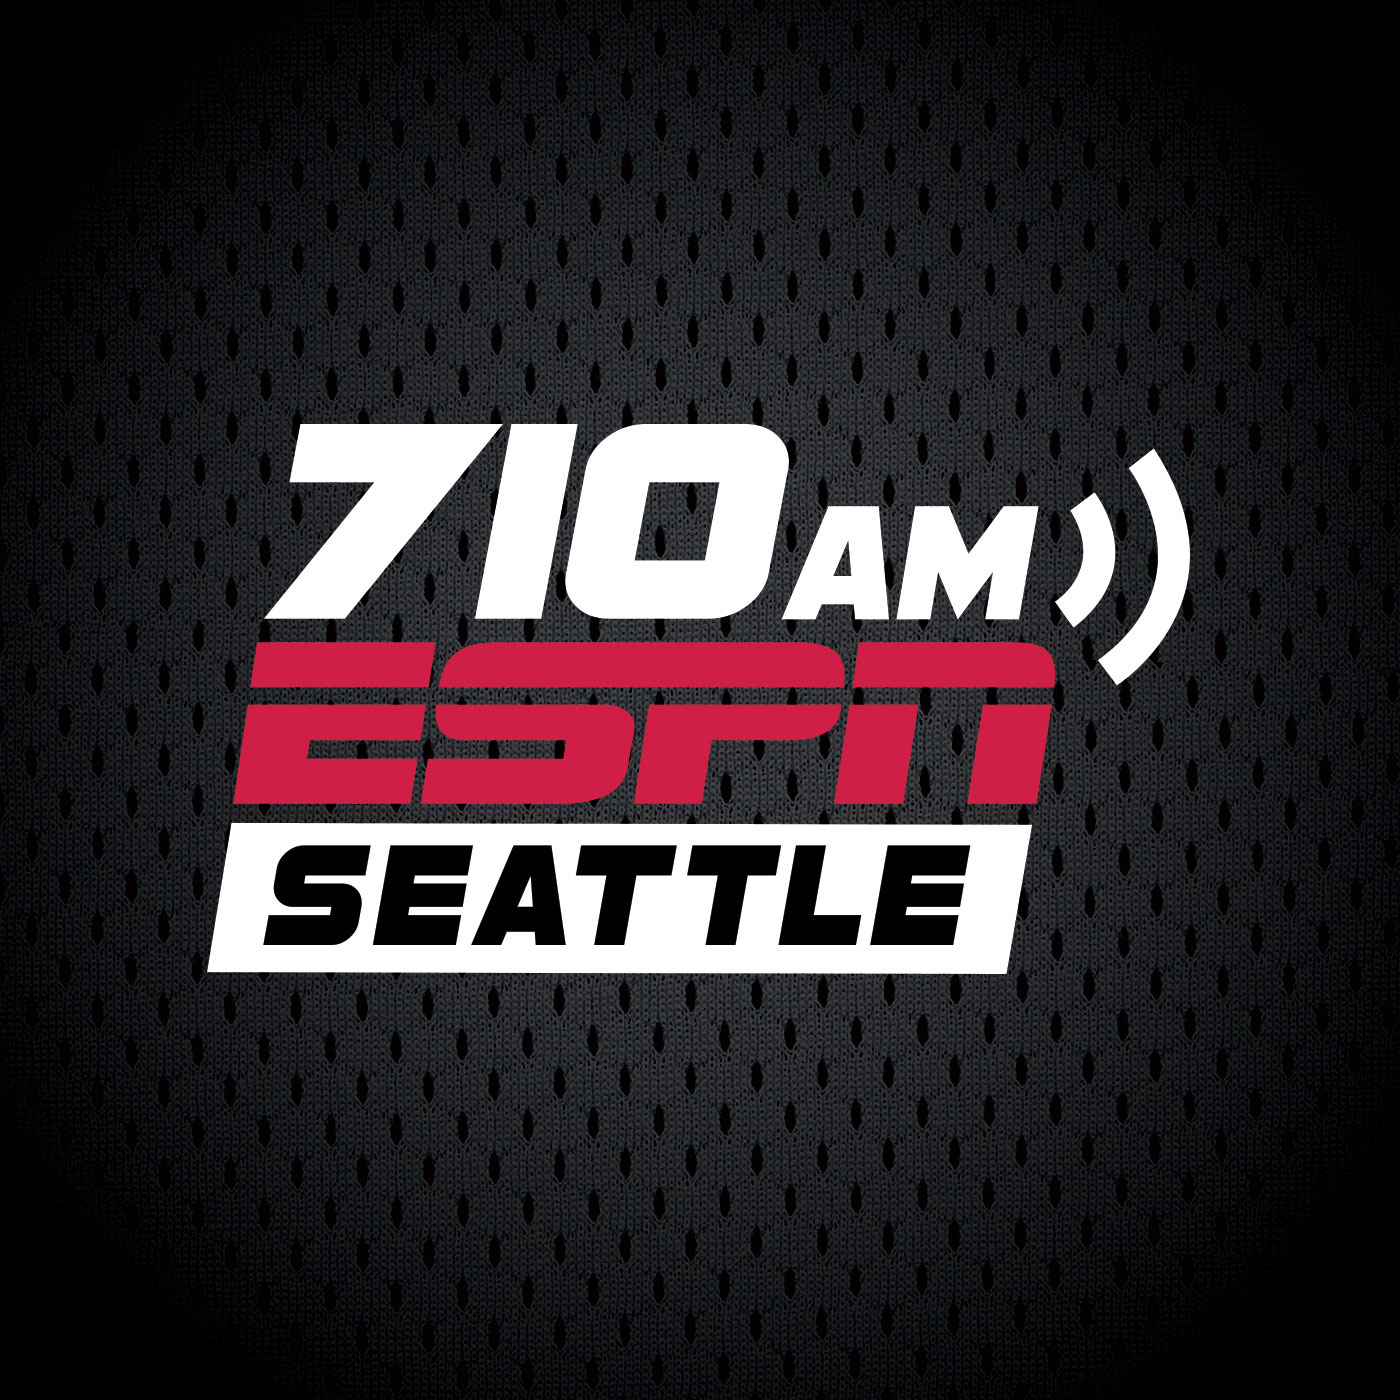 Hour 2 - More thankfulness for the Seahawks